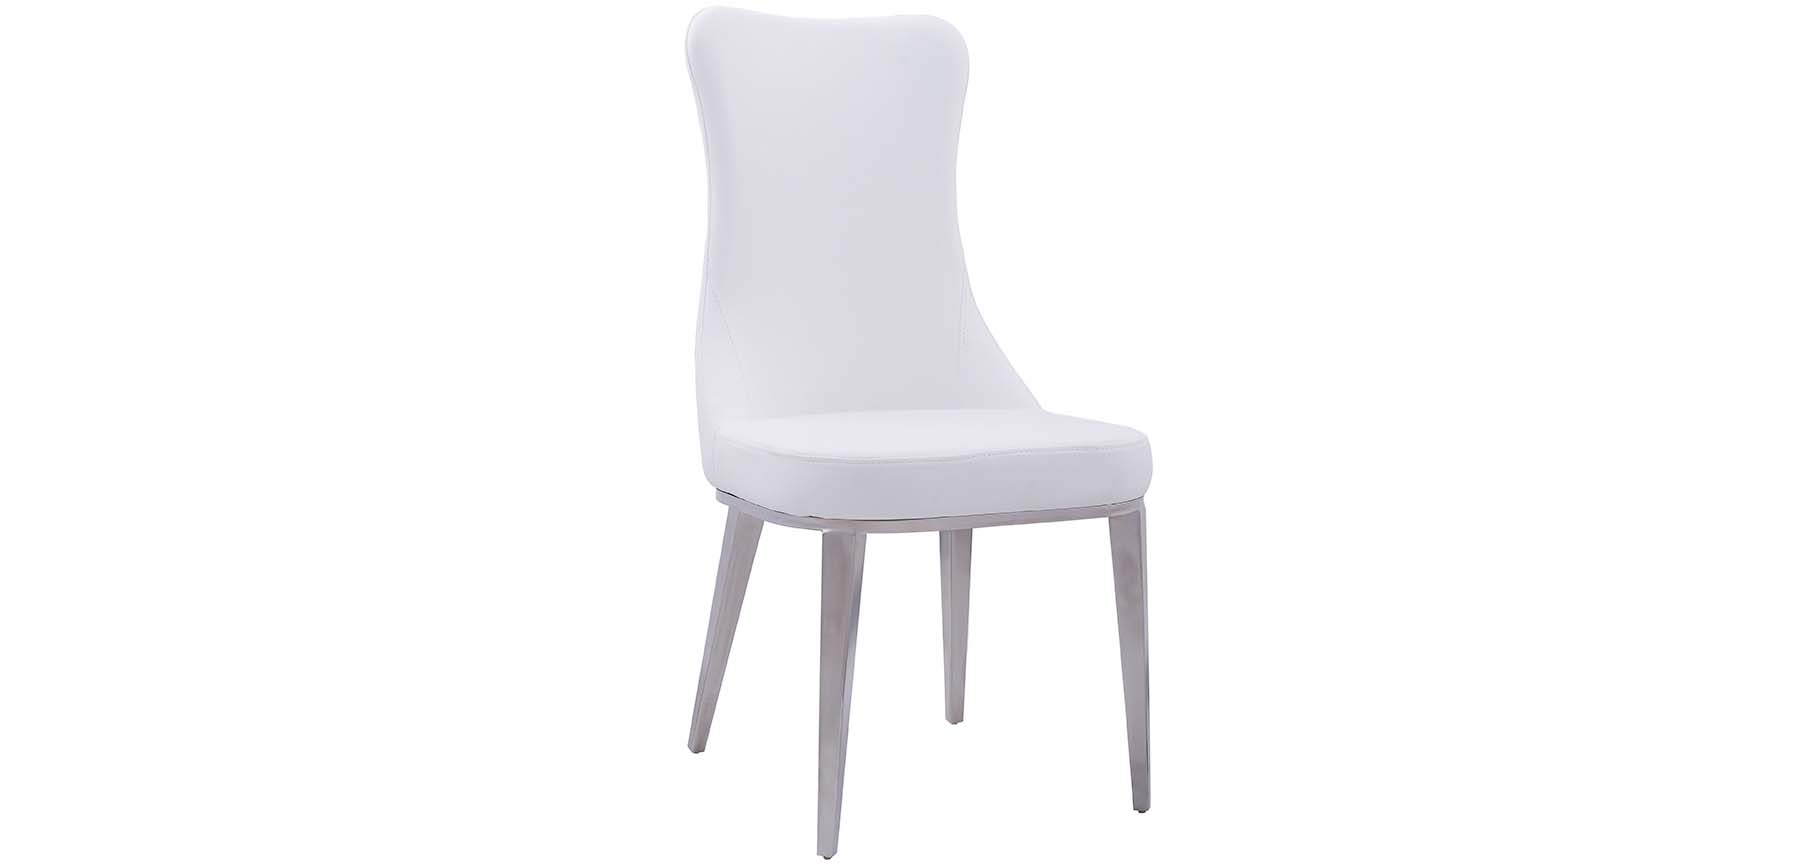 Brands Status orders 6138 Solid White (no pattern) Chair